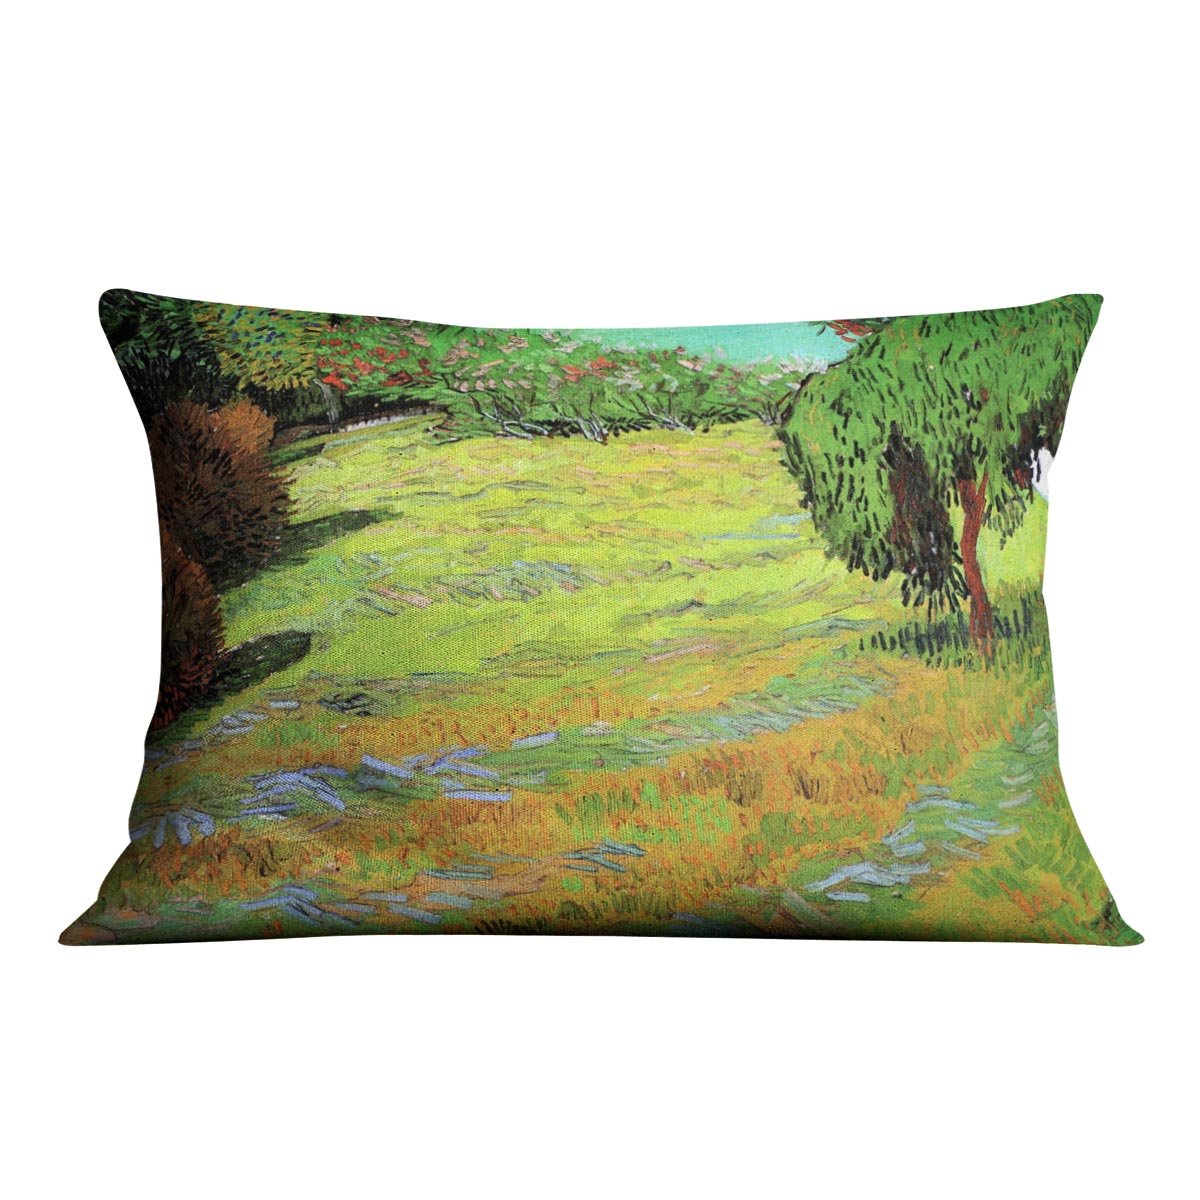 Sunny Lawn in a Public Park by Van Gogh Throw Pillow